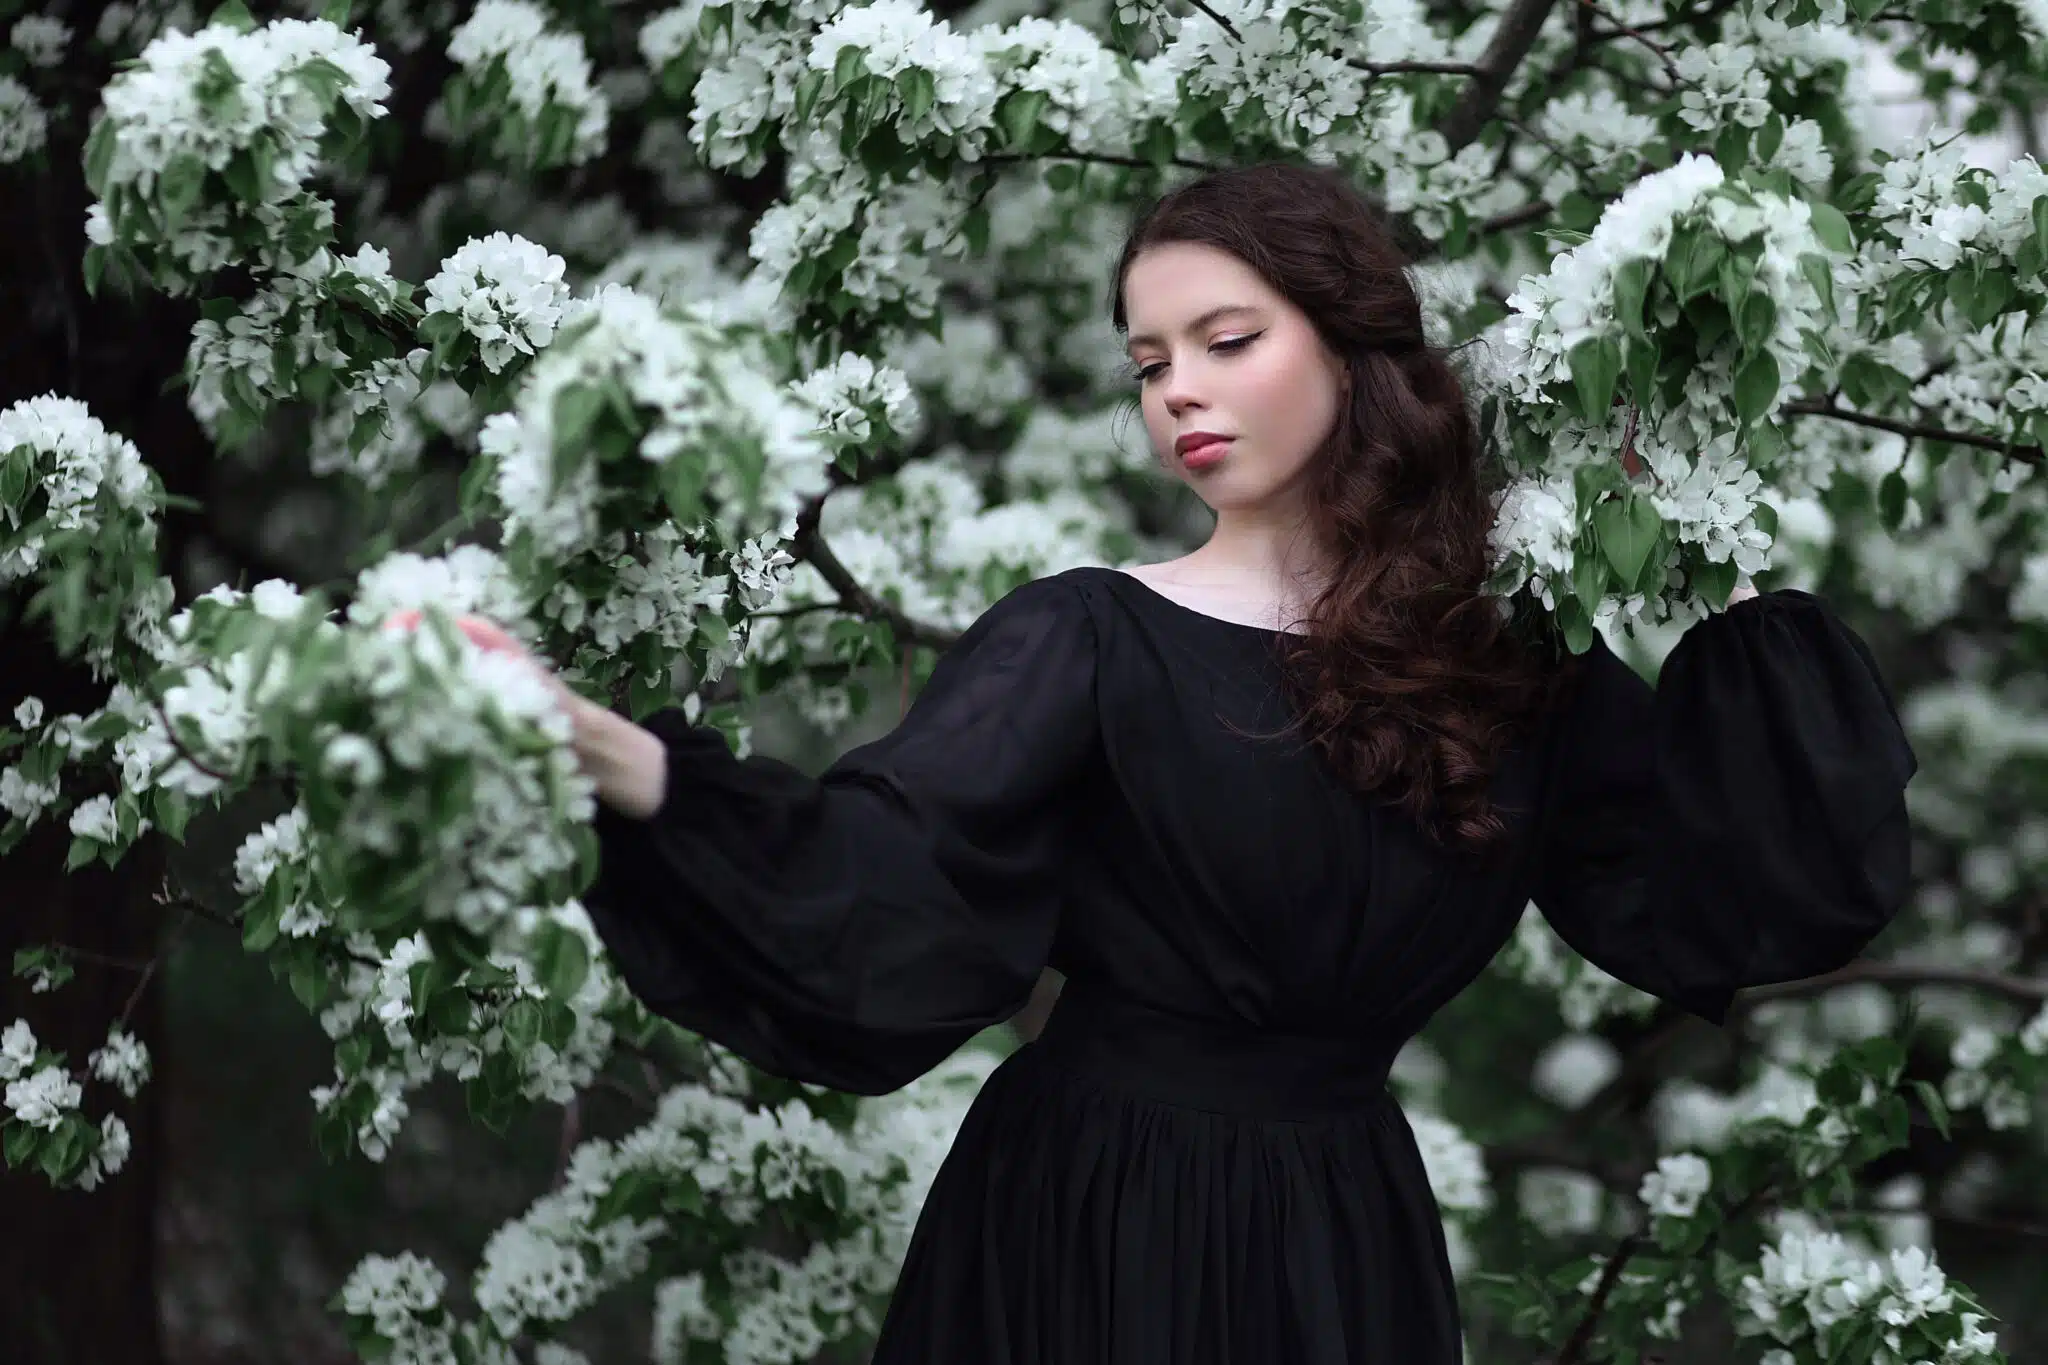 melancholic young woman in black dress standing among blooming trees
